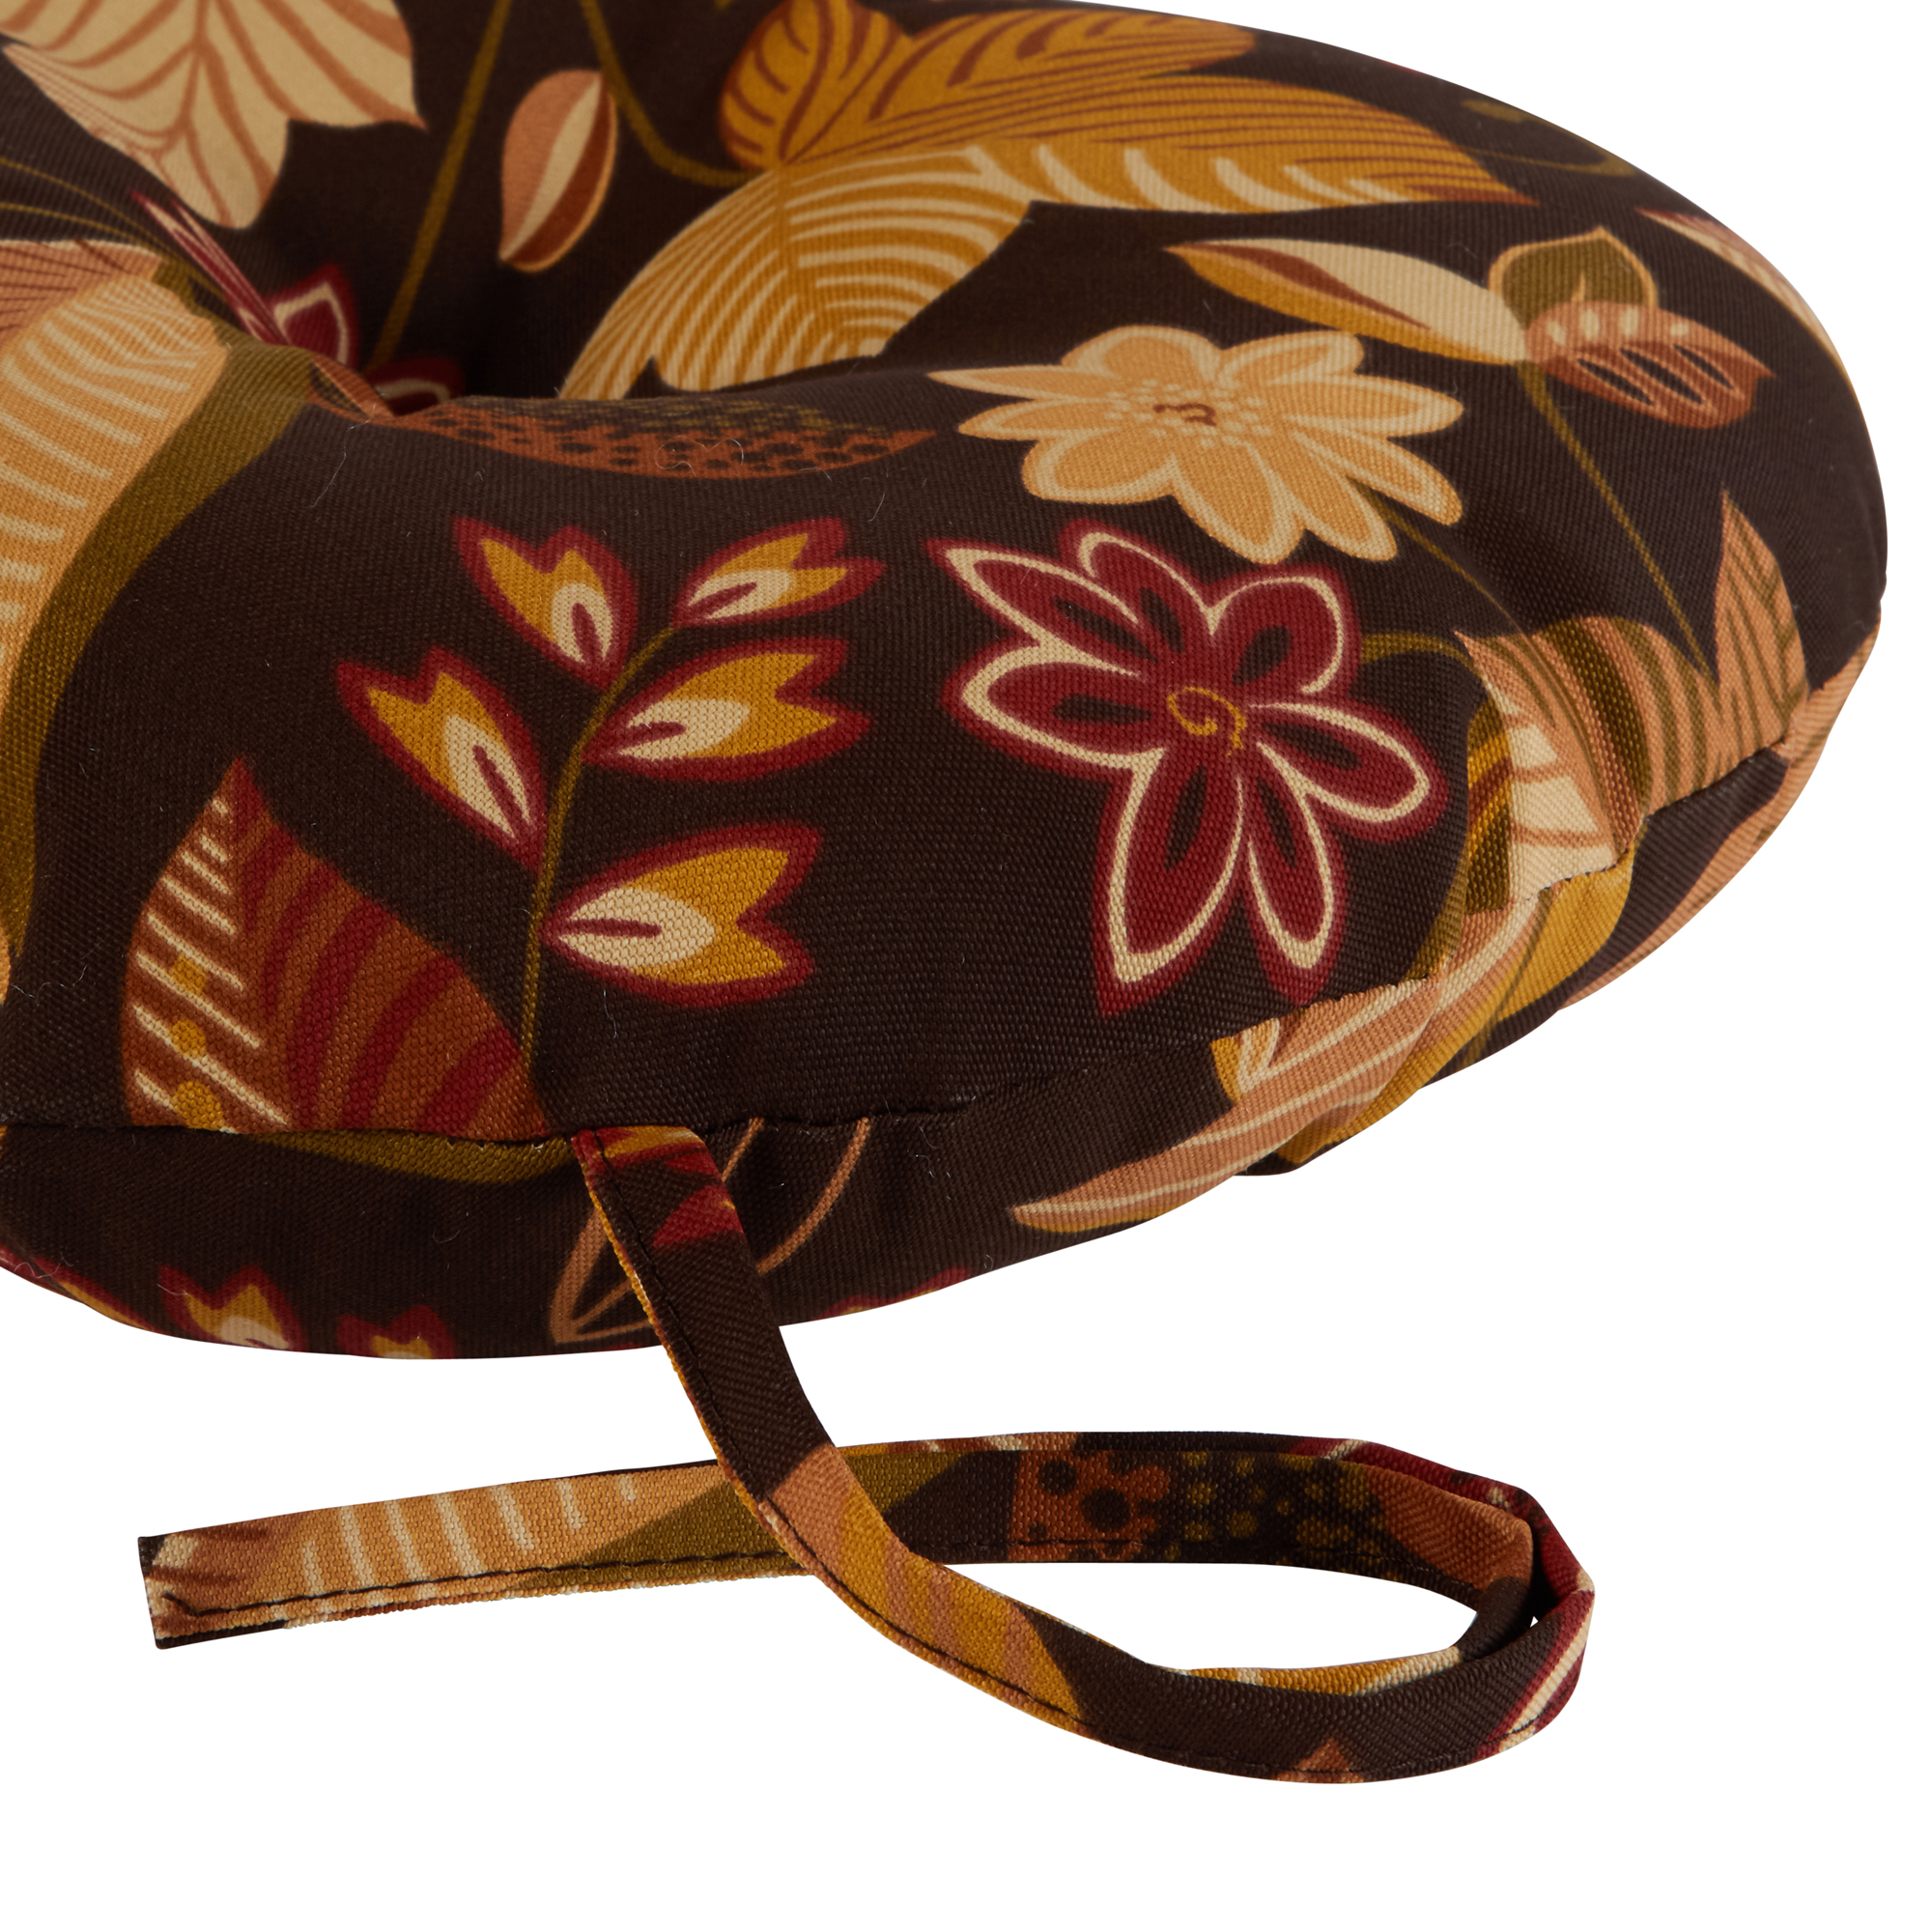 Greendale Home Fashions Timberland Floral 15 in. Round Outdoor Reversible Bistro Seat Cushion (Set of 2) - image 3 of 7